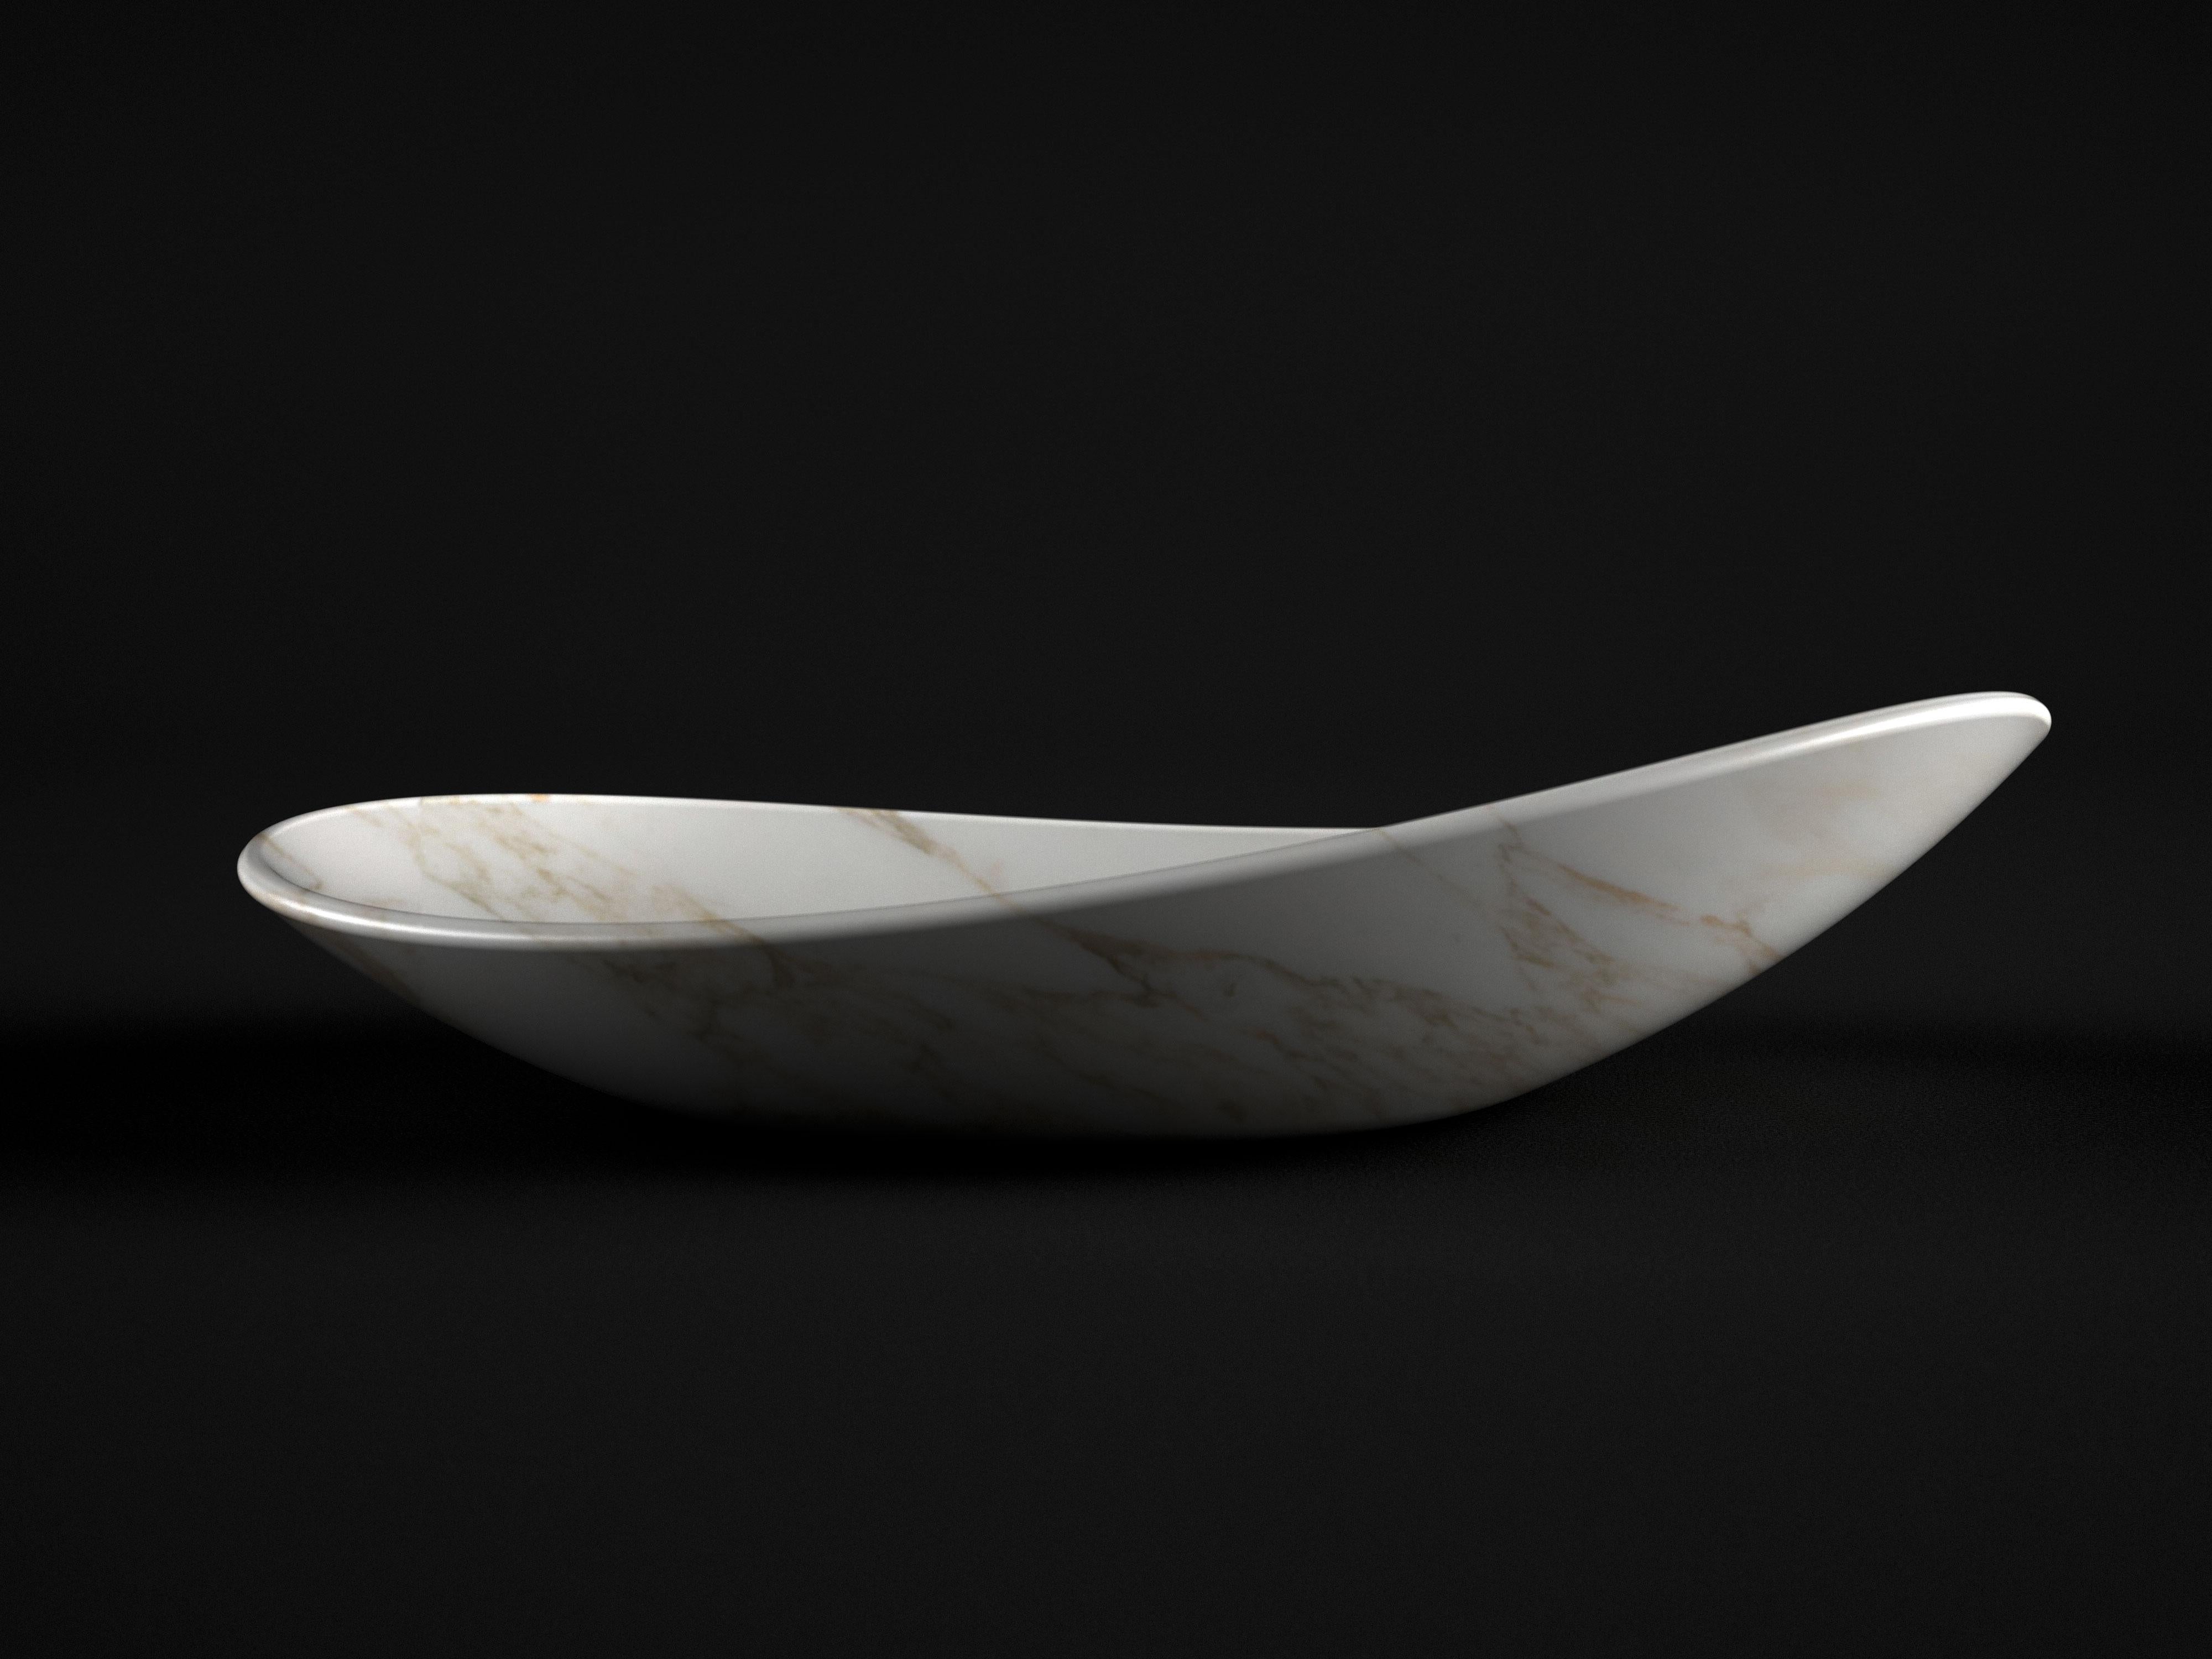 Modern Fruit Bowl Vase Solid Calacatta Marble White Oval Contemporary Design Italy For Sale